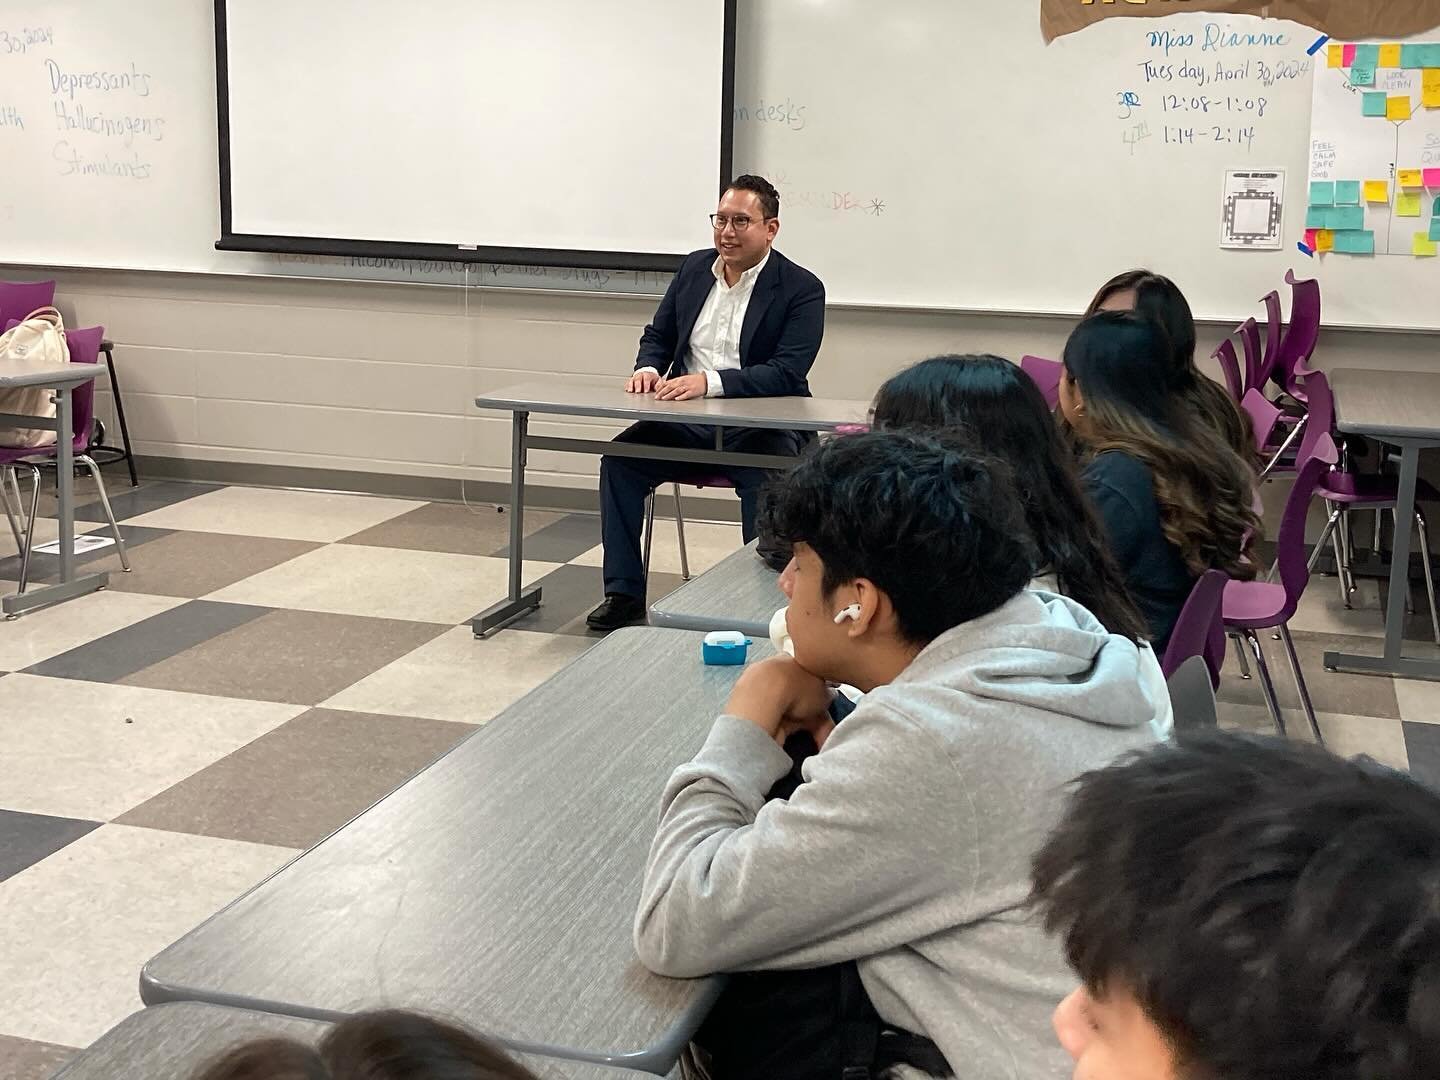 LAW DAY! Today, Inti visited Brooklyn Center Middle &amp; High School to talk about how joyful (and sometimes frustrating) the legal practice can be. 🤓😅 

He spoke in Spanish to Latino students, who asked about his career path, memorable cases, and